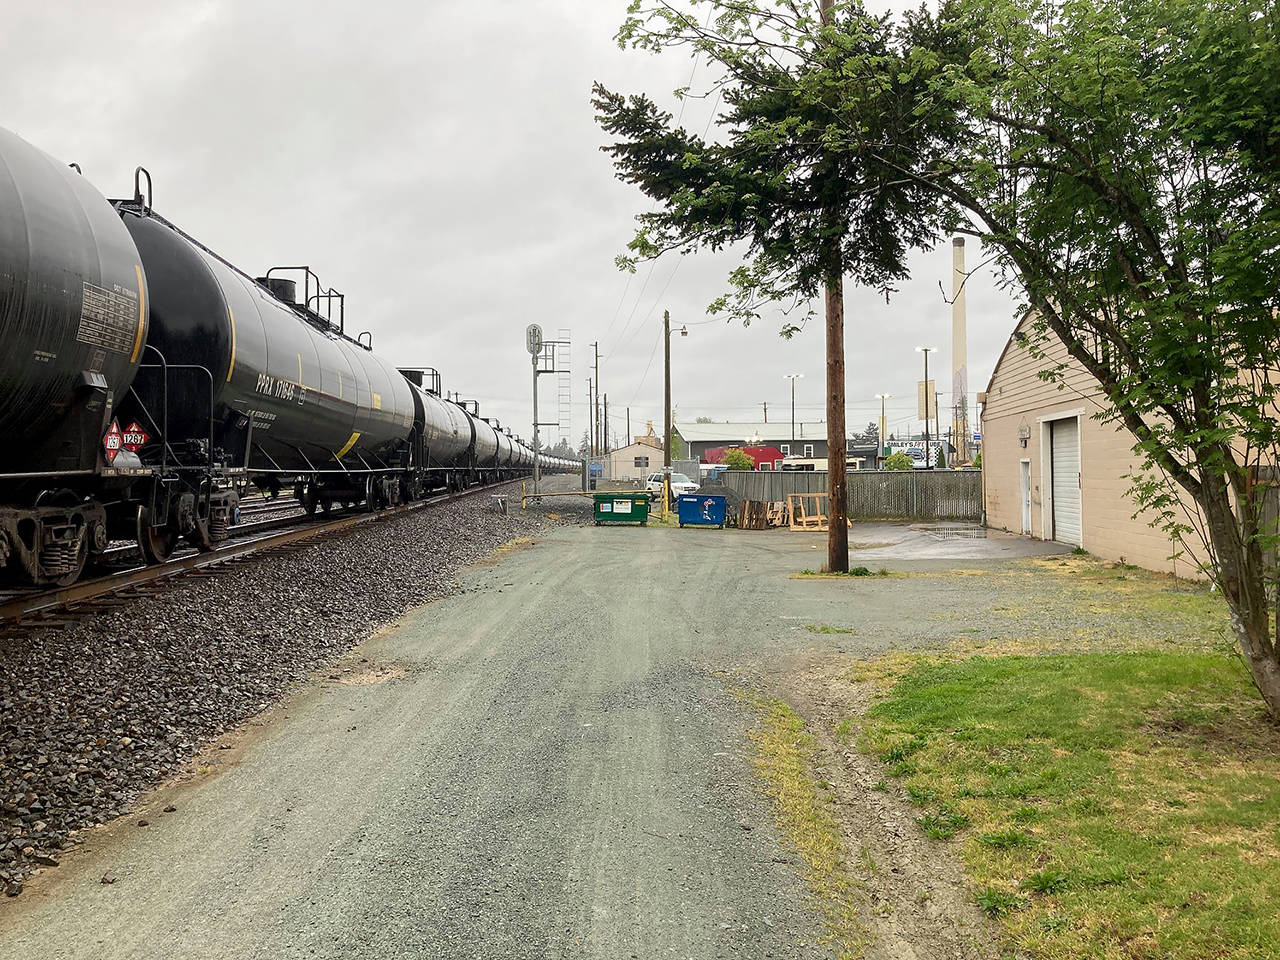 A pedestrian was struck and killed by a train in Monroe on Friday morning. (Monroe Police Department)